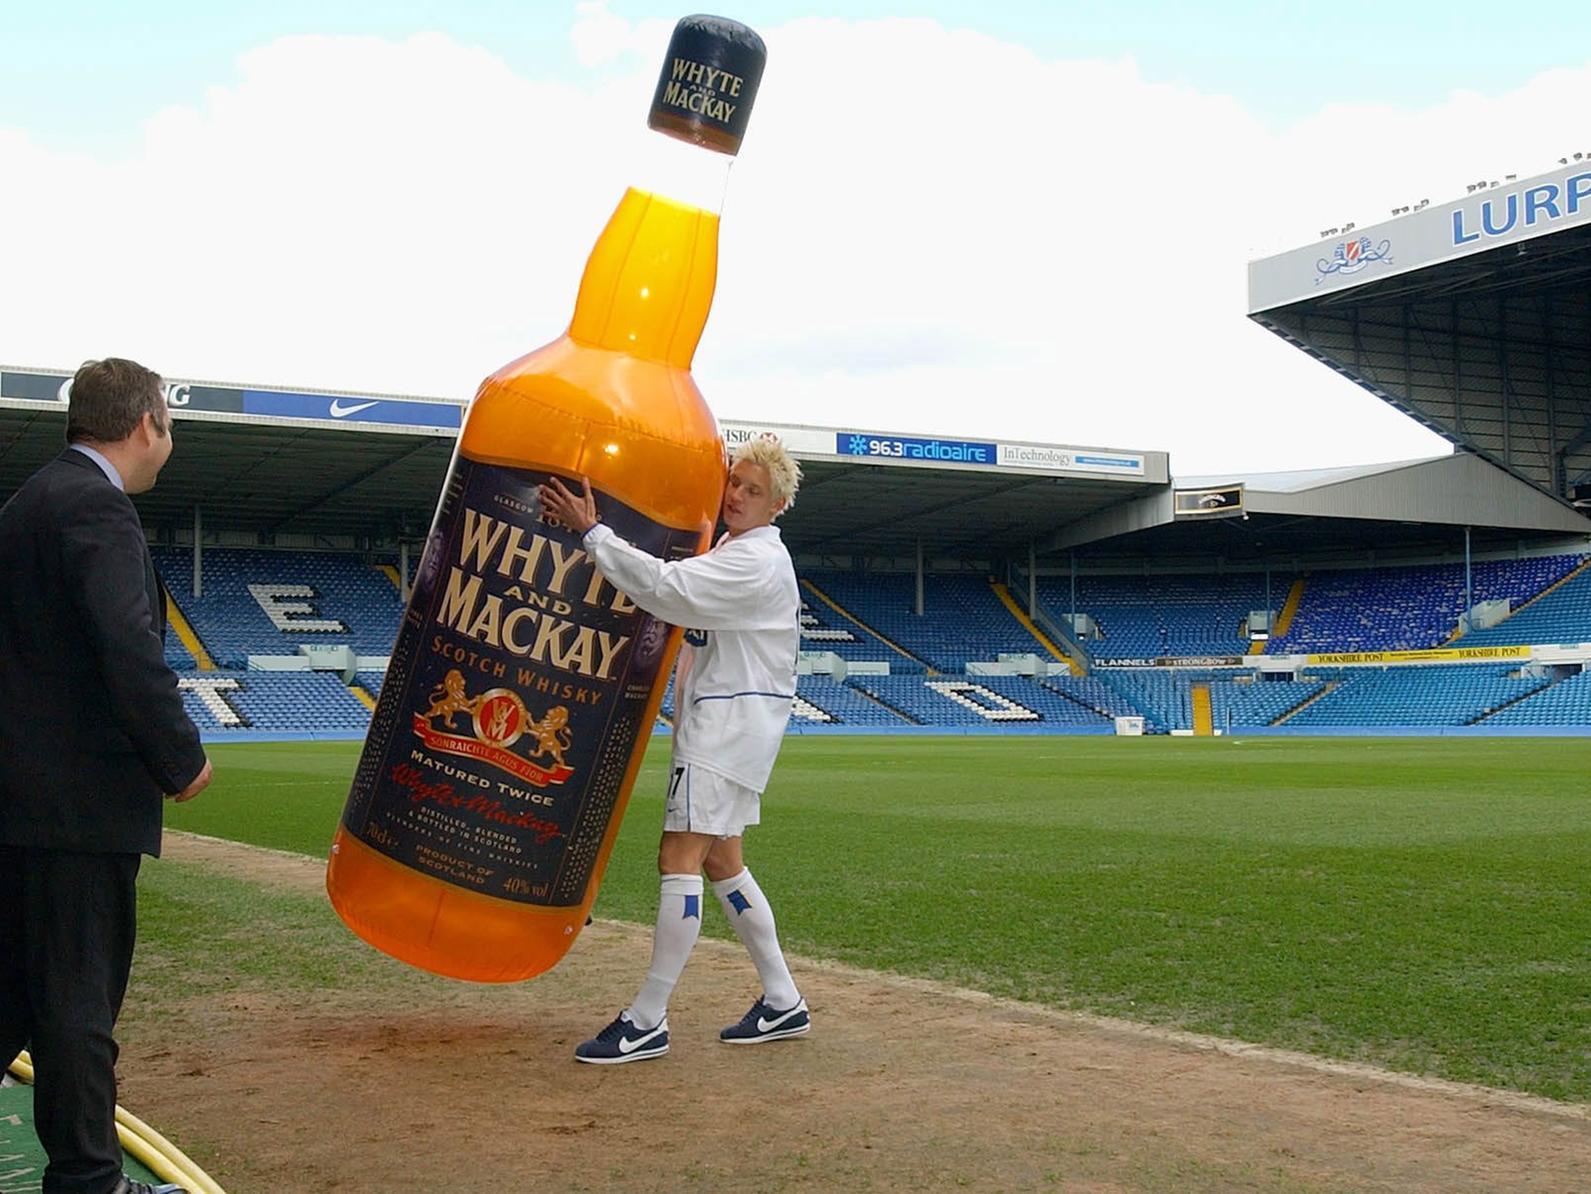 Striker Alan Smith carries a large replica bottle of the club's new multi-million pound sponsors Whyte and Mackay whisky from the Elland Road pitch,